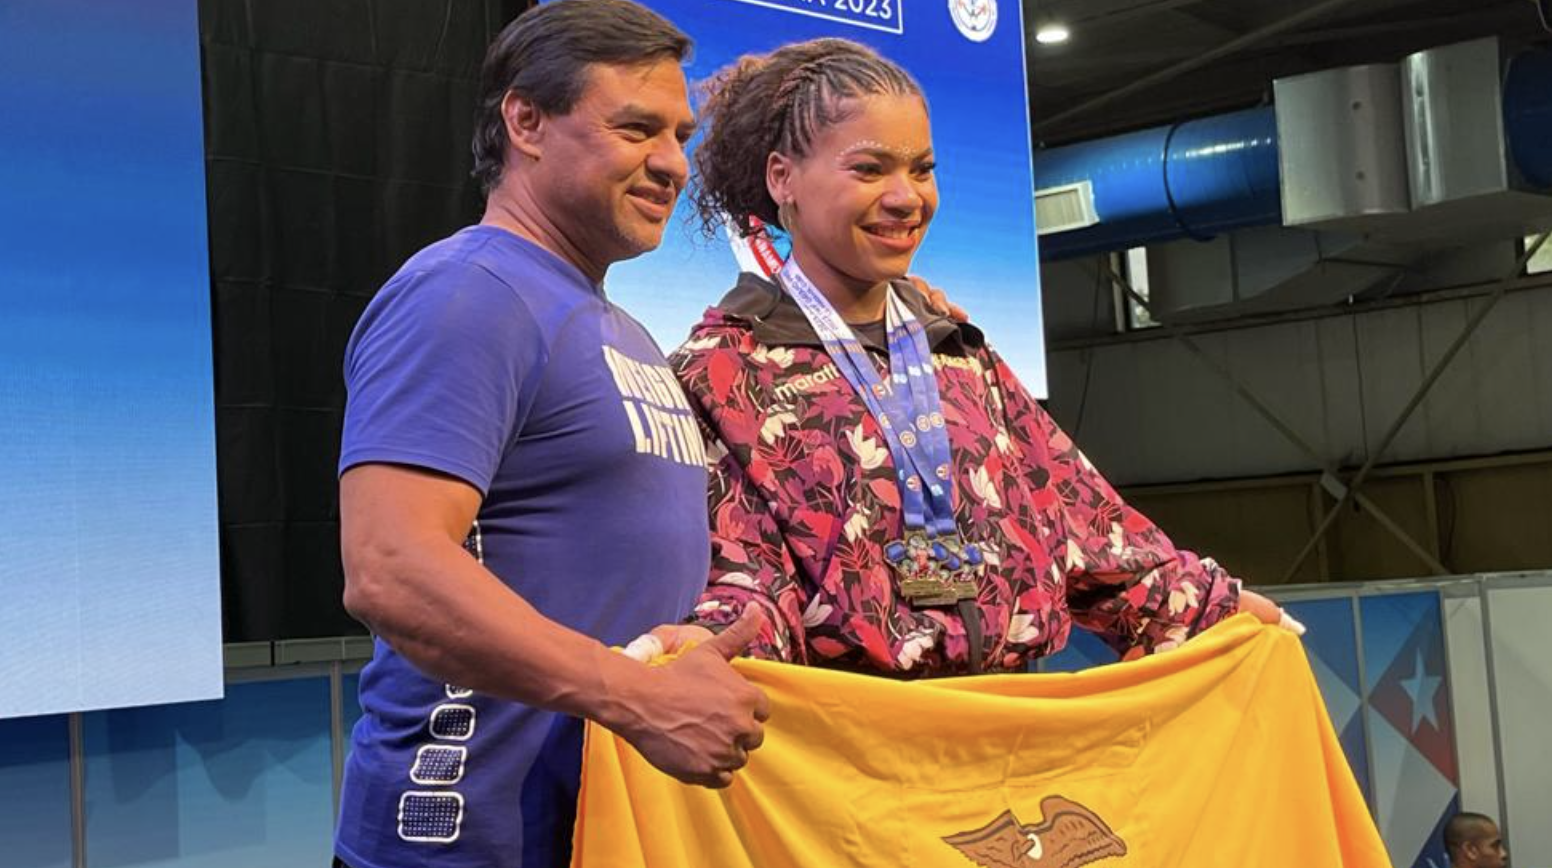 World record for Palacios continues stunning success for weightlifting's special family